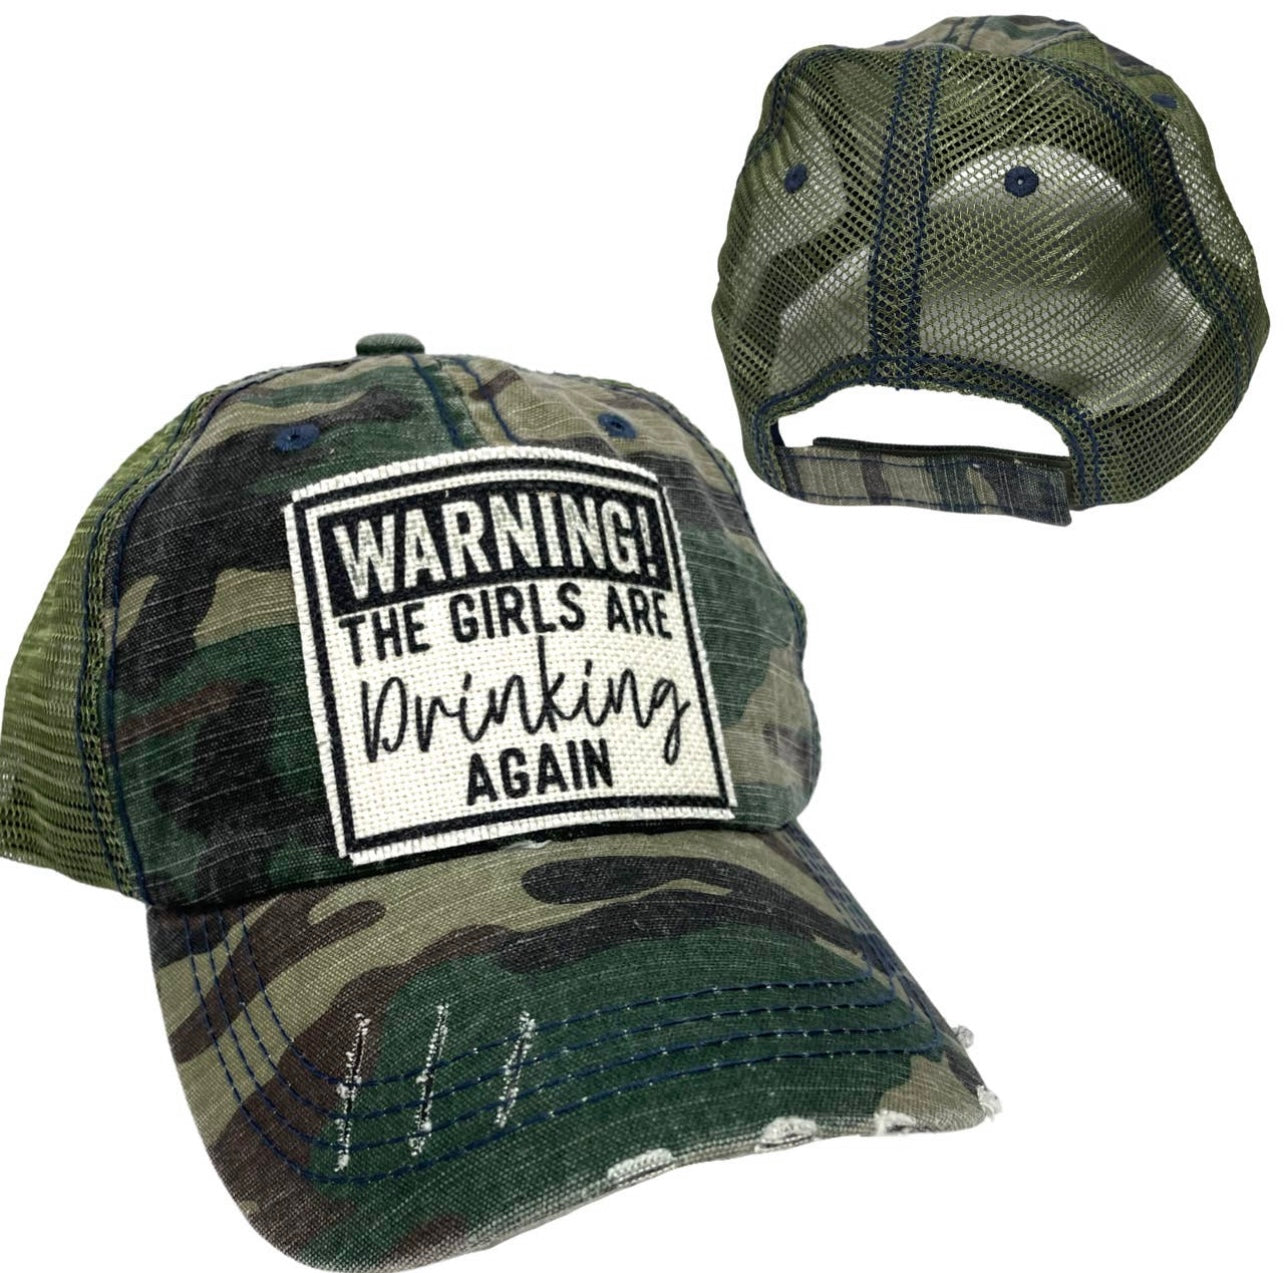 WARNING! THE GIRLS ARE DRINKING AGAIN UNISEX HAT